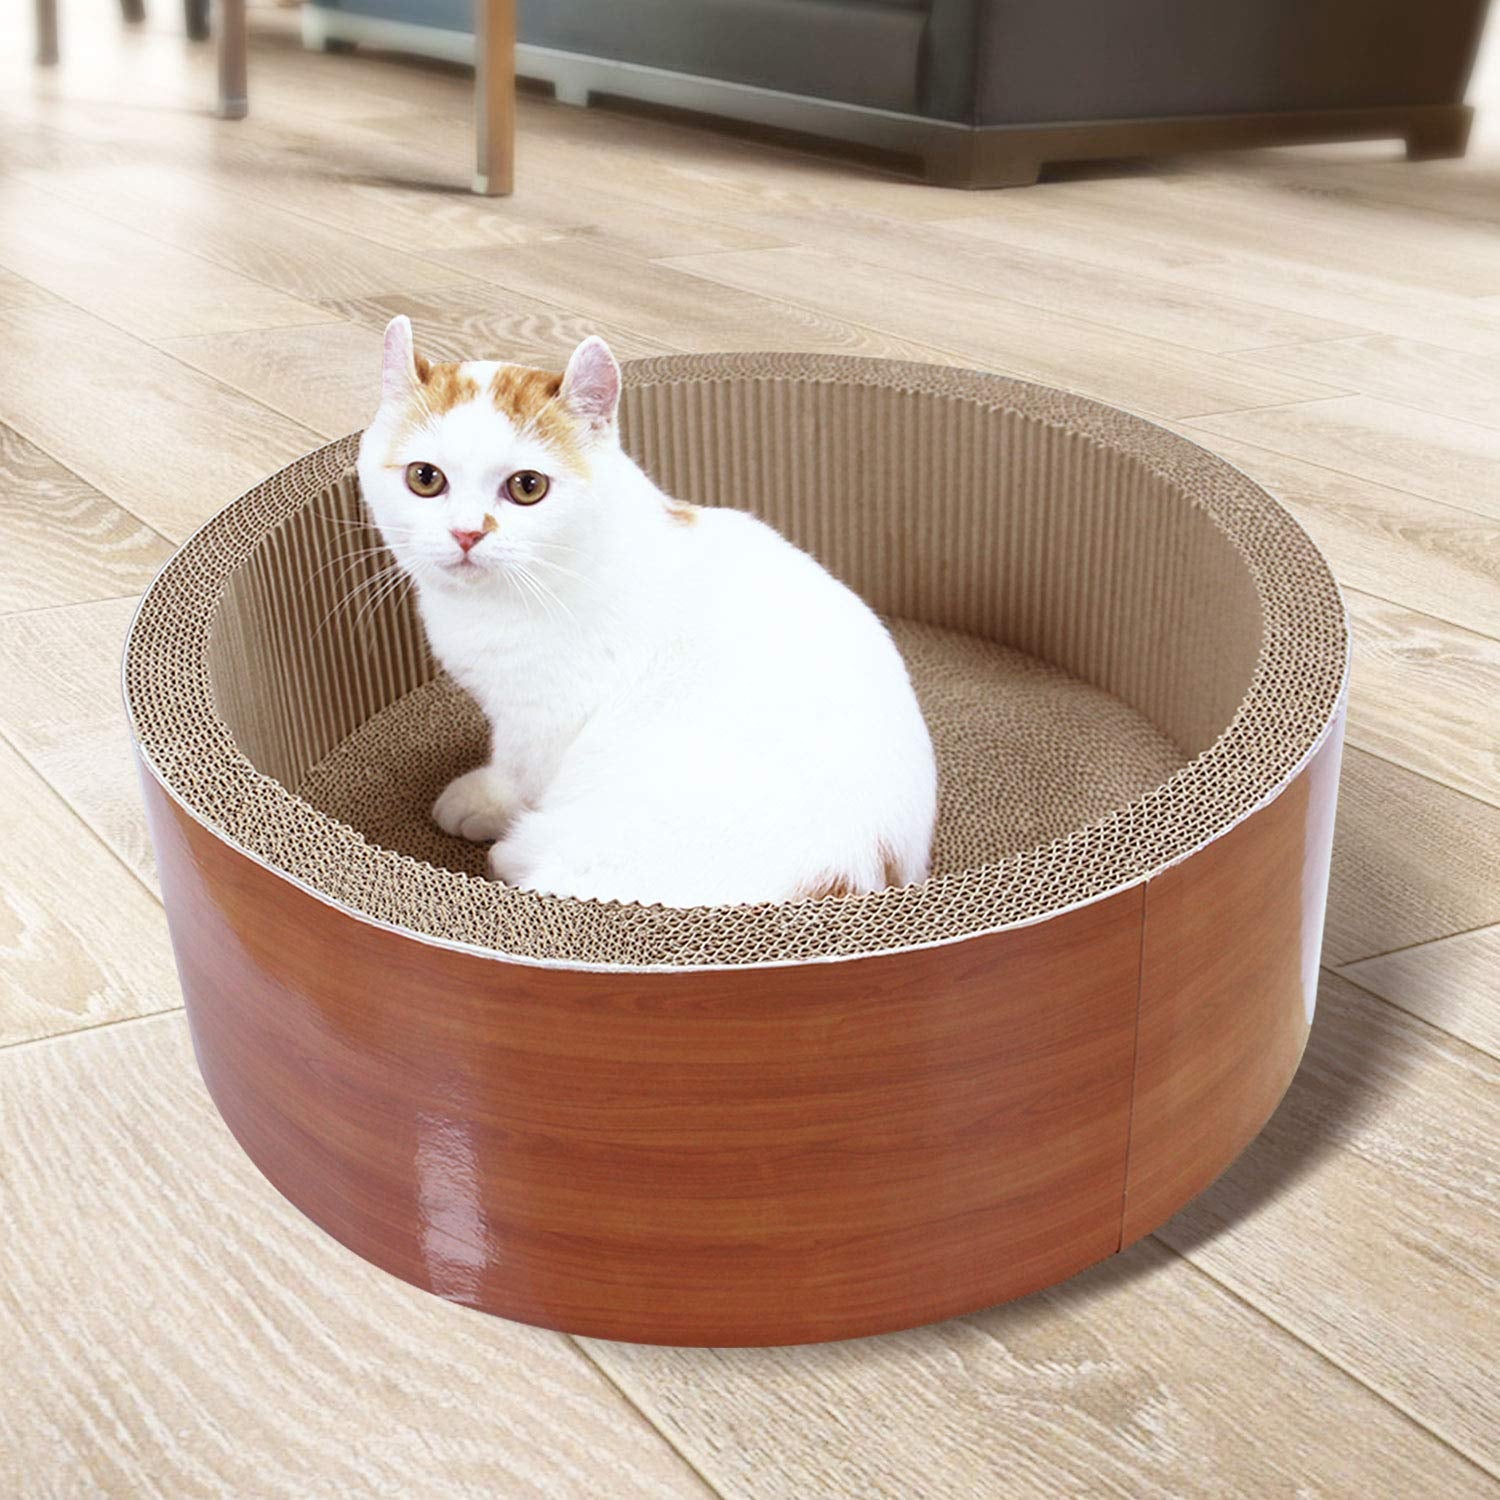 Scratchme Cat Scratch Cardboard Deluxe Prevents Furniture Damage & Contains Catnip to Attract Your Cat